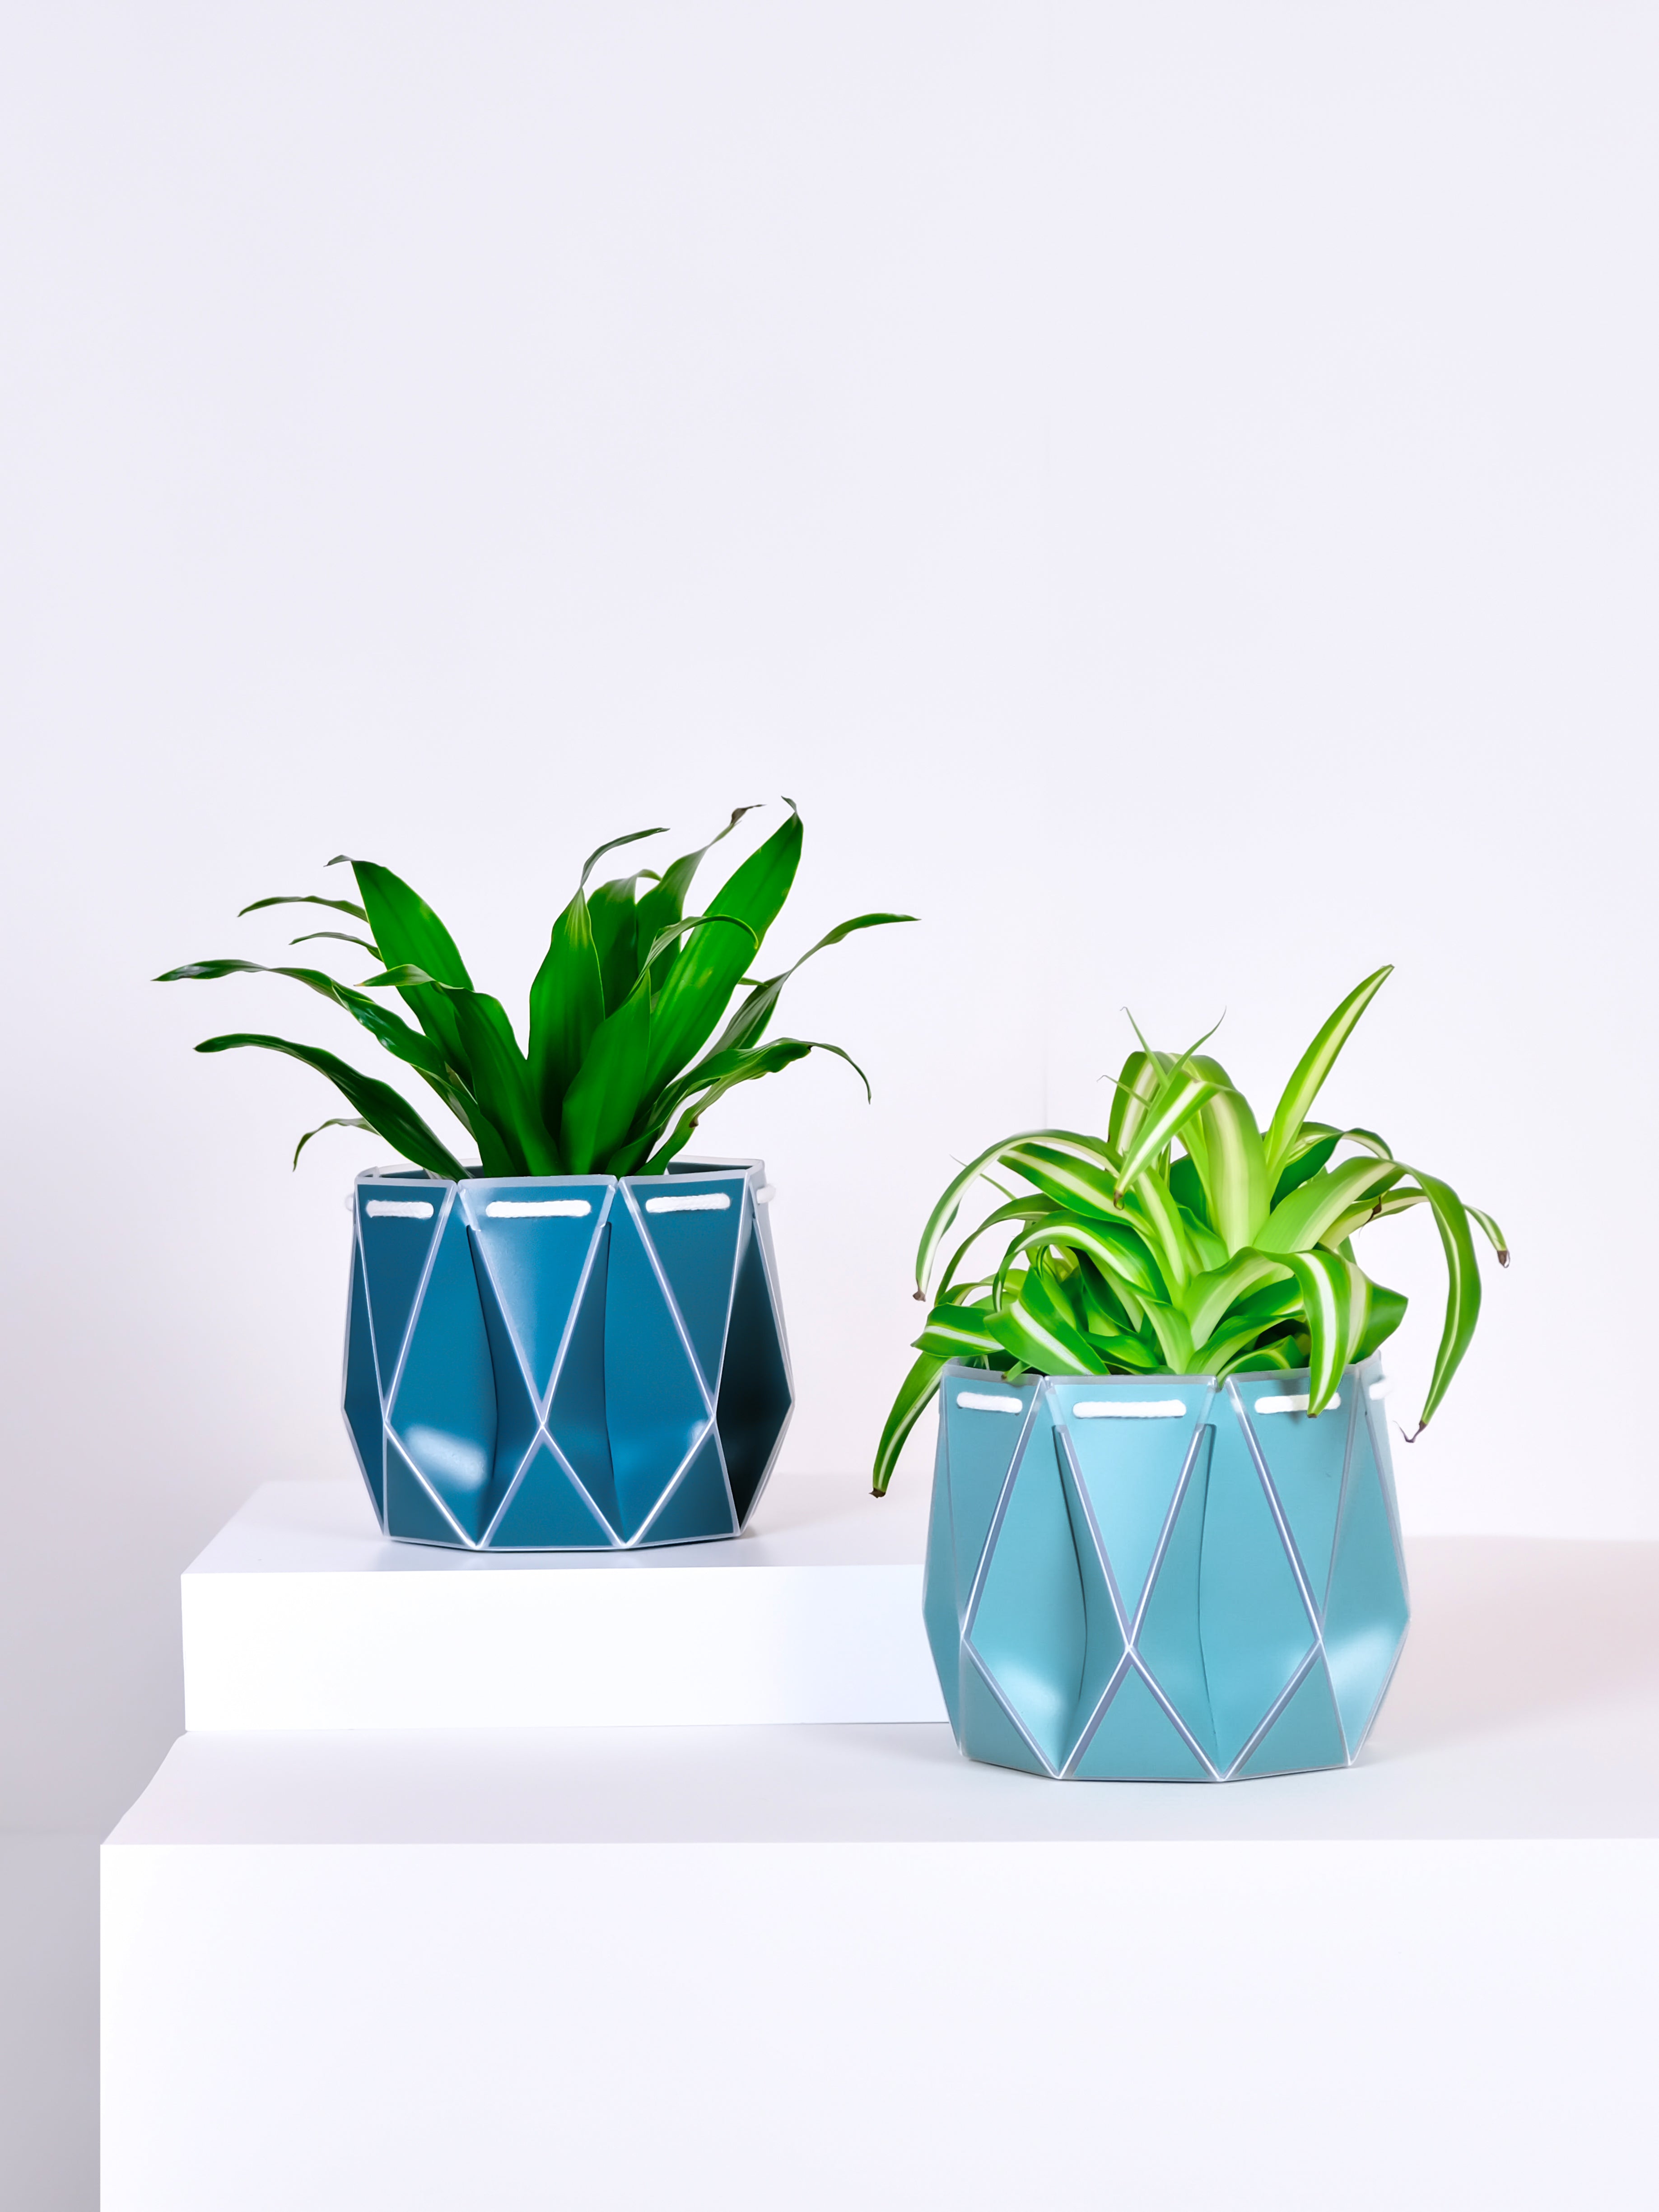 Flat packed plant pots sitting on a white plinth holding plants. Holistic sustainable product design.